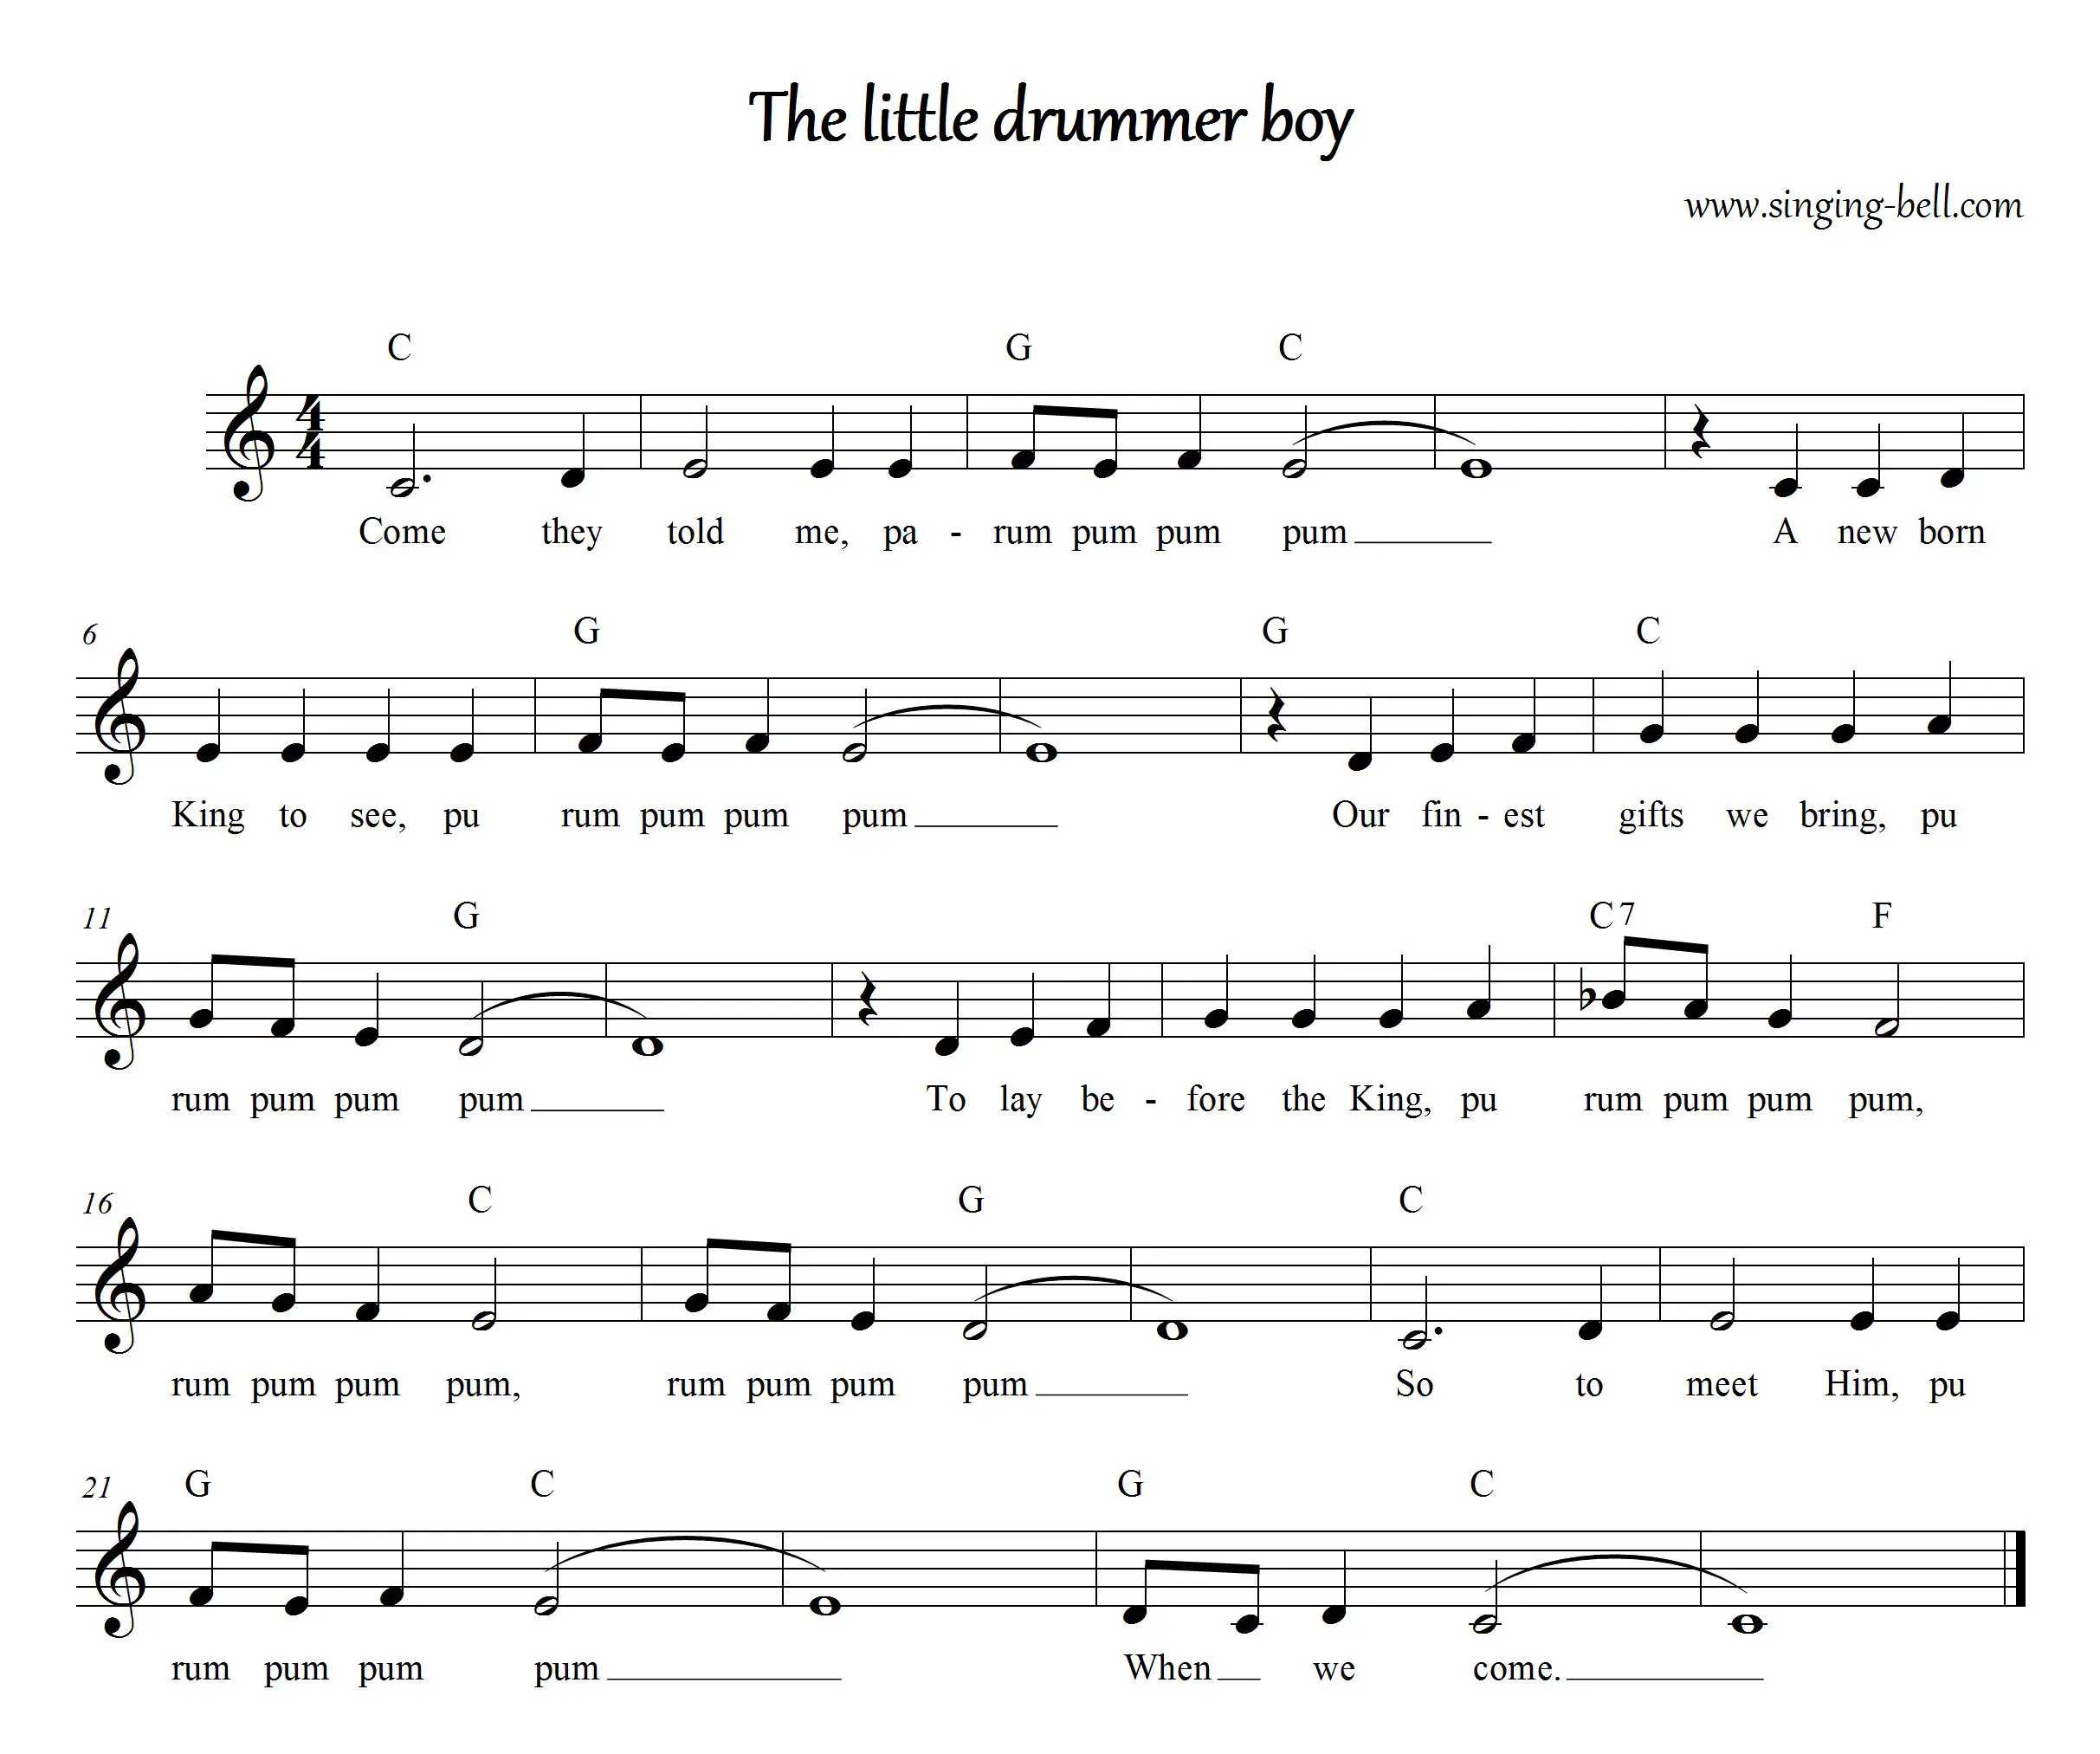 Free Christmas Carols > the Little Drummer Boy - free mp3 audio song download